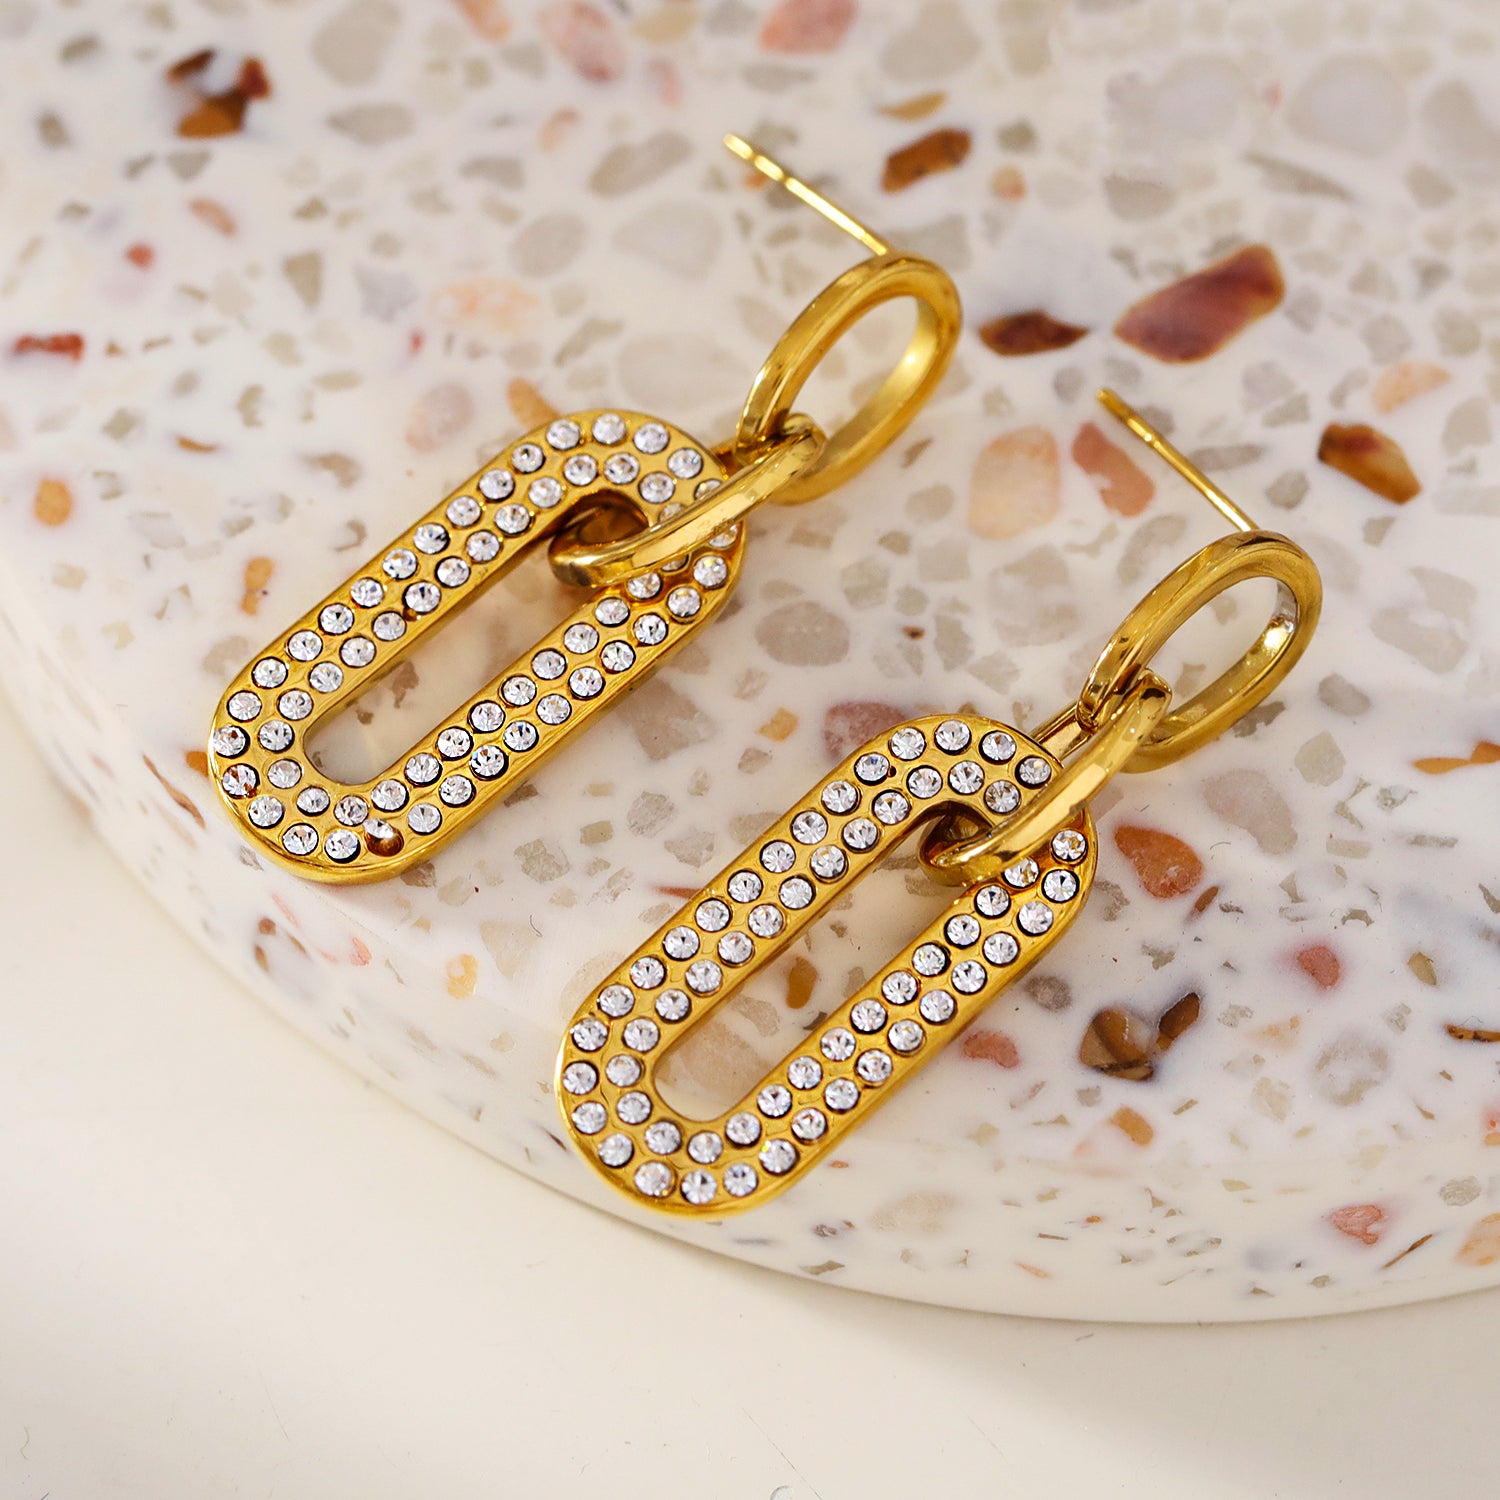 Style LAIA 76857: Rounded Rectangle Shaped Earrings embedded with Zirconia Gemstones.